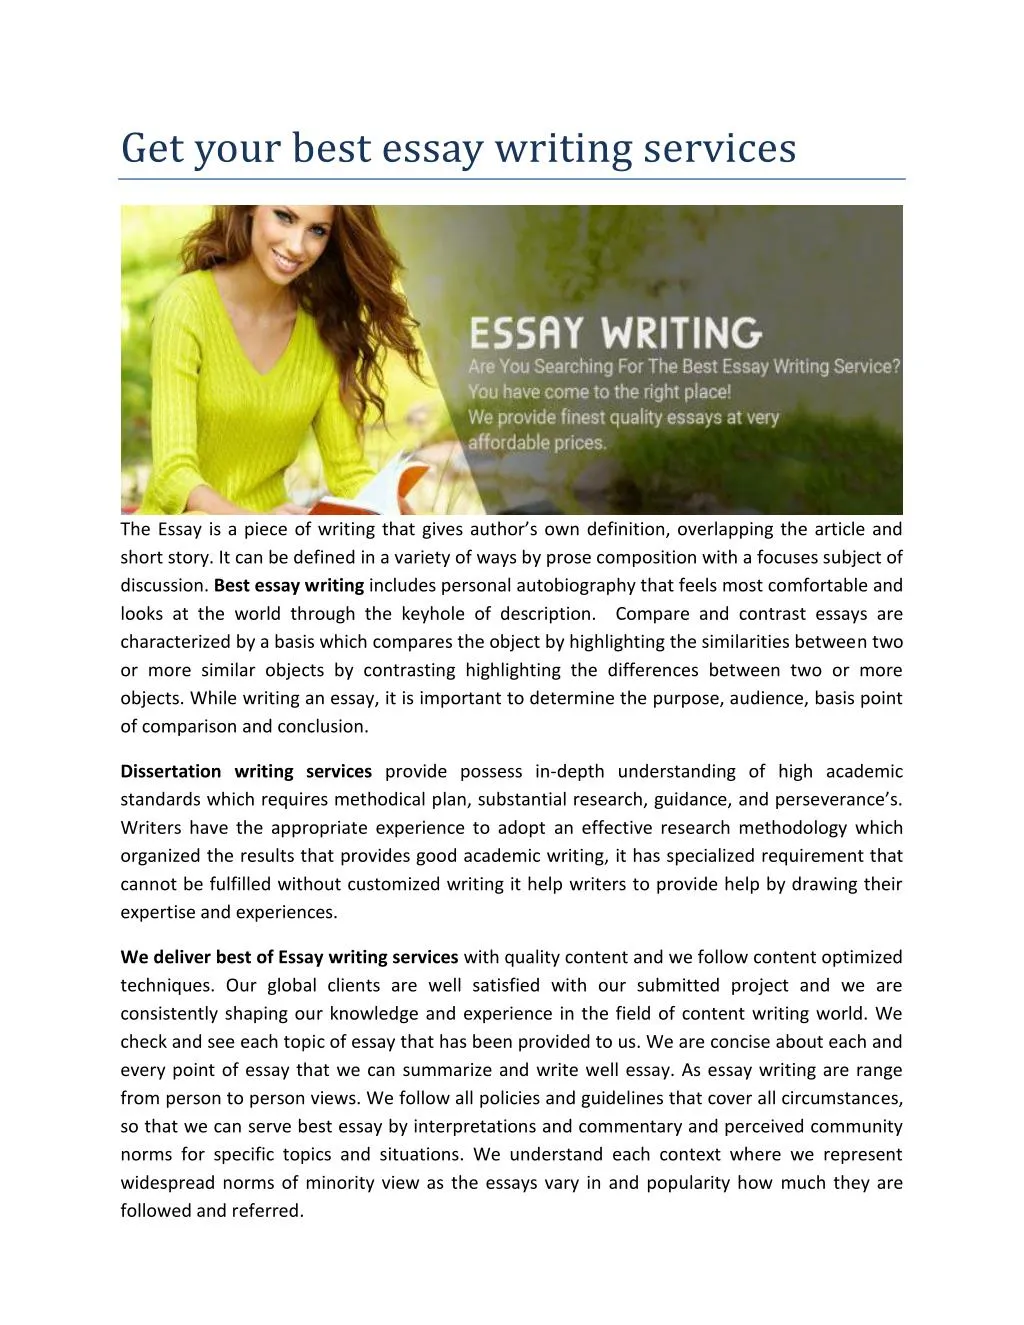 get your best essay writing services